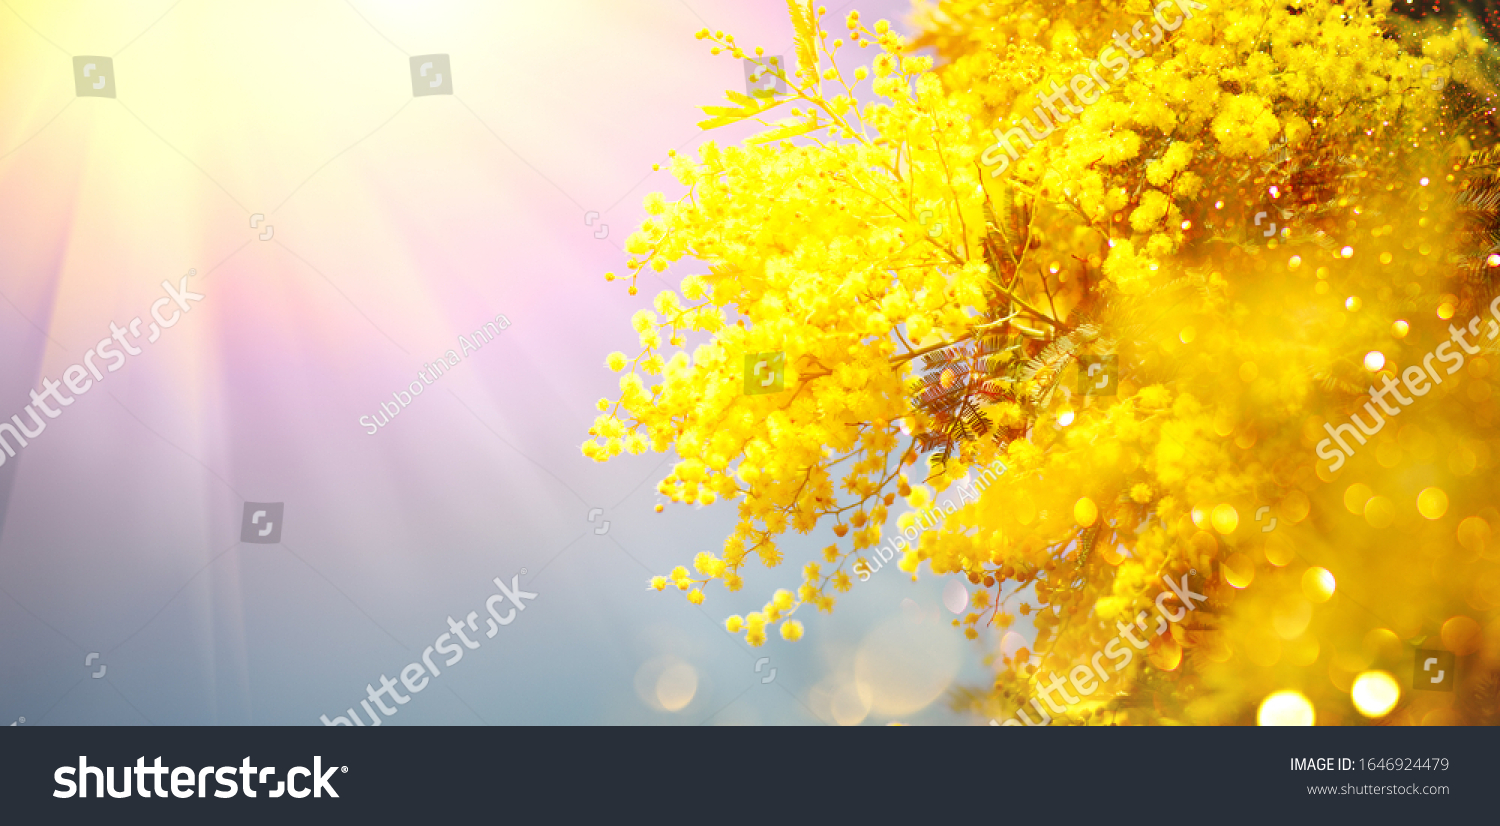 Mimosa Spring Flowers Easter background. Holiday backdrop, border art design. Blooming mimosa tree over blue sky, bright sun flare. Mother's Day. Garden, gardening. Spring holiday blossom